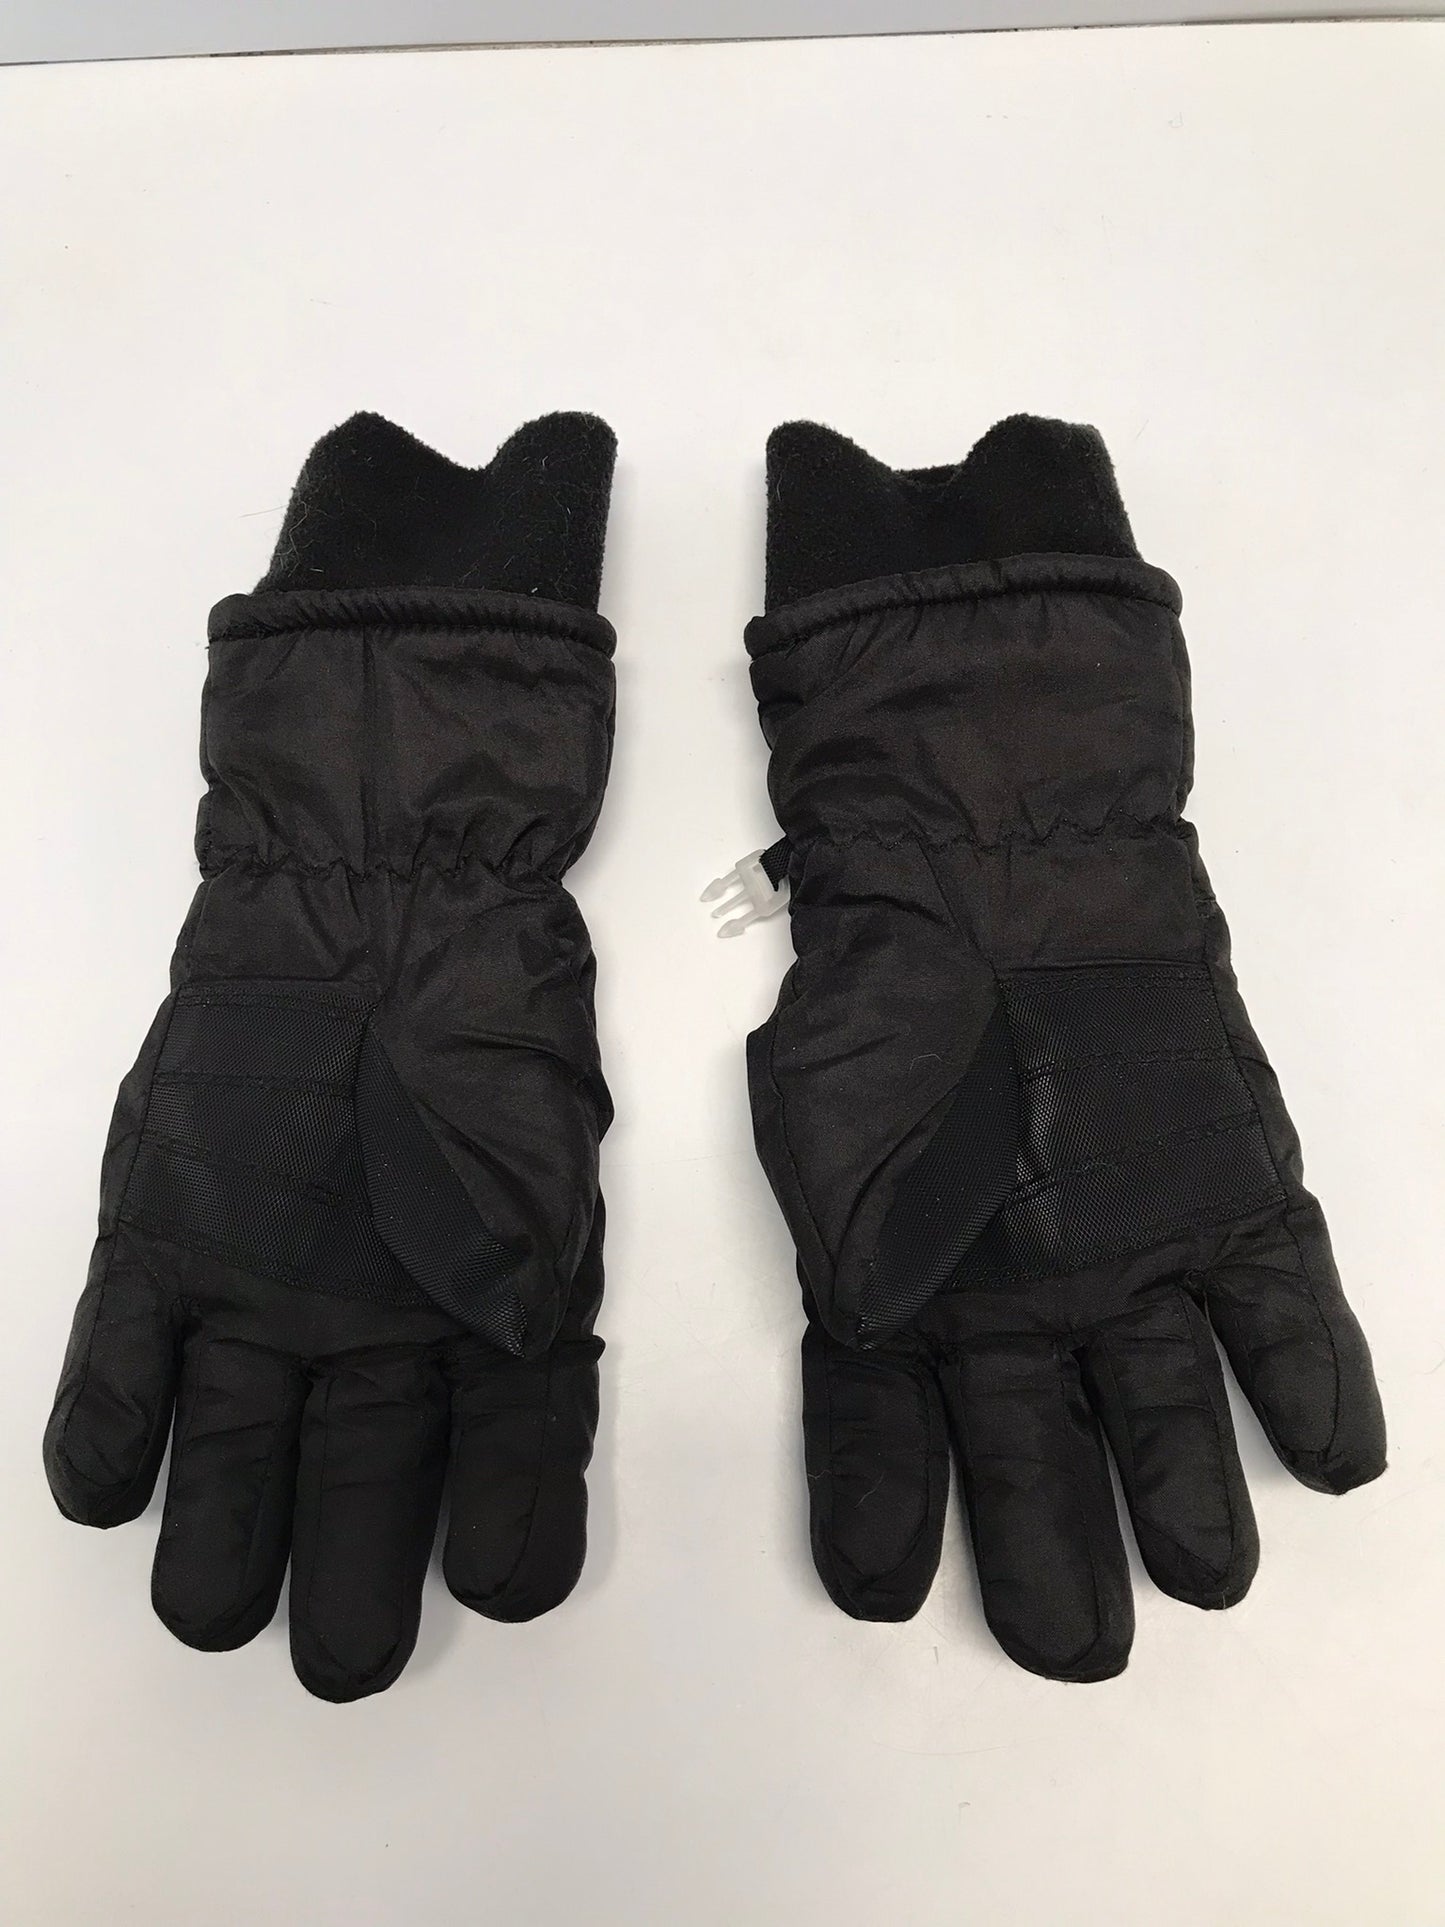 Winter Gloves And Mitts Child Size 7-9 Hot Paws Black